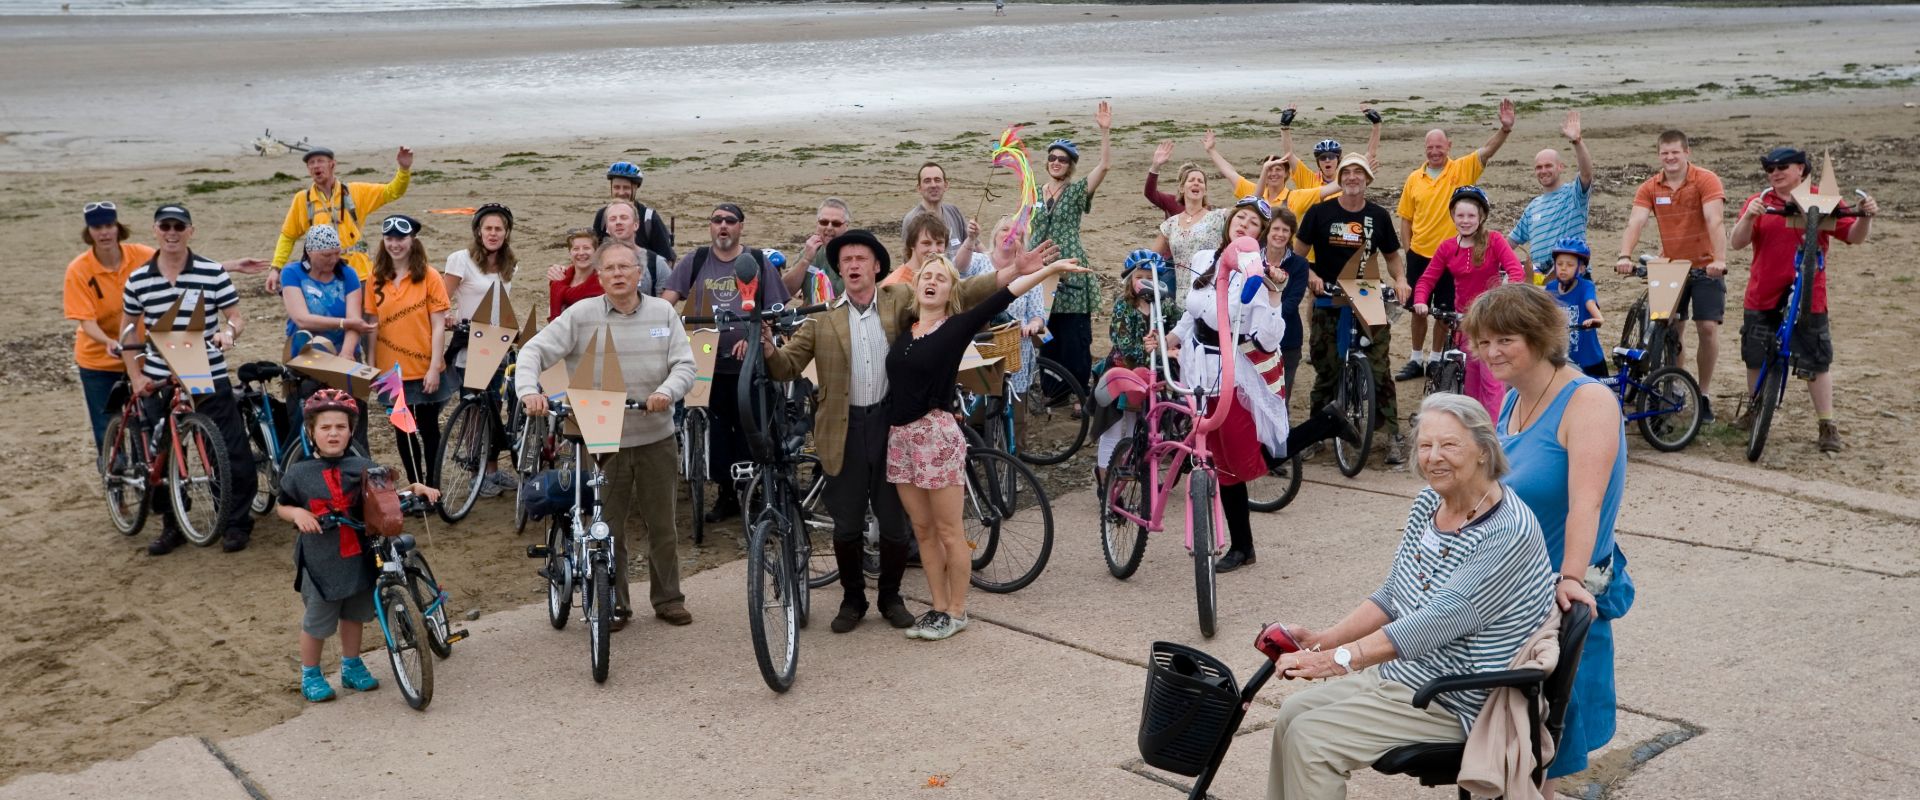 The audience and crew gathered at the end of Don Quixote by Bicycle, on a beach, celebrating the end of their adventure together.